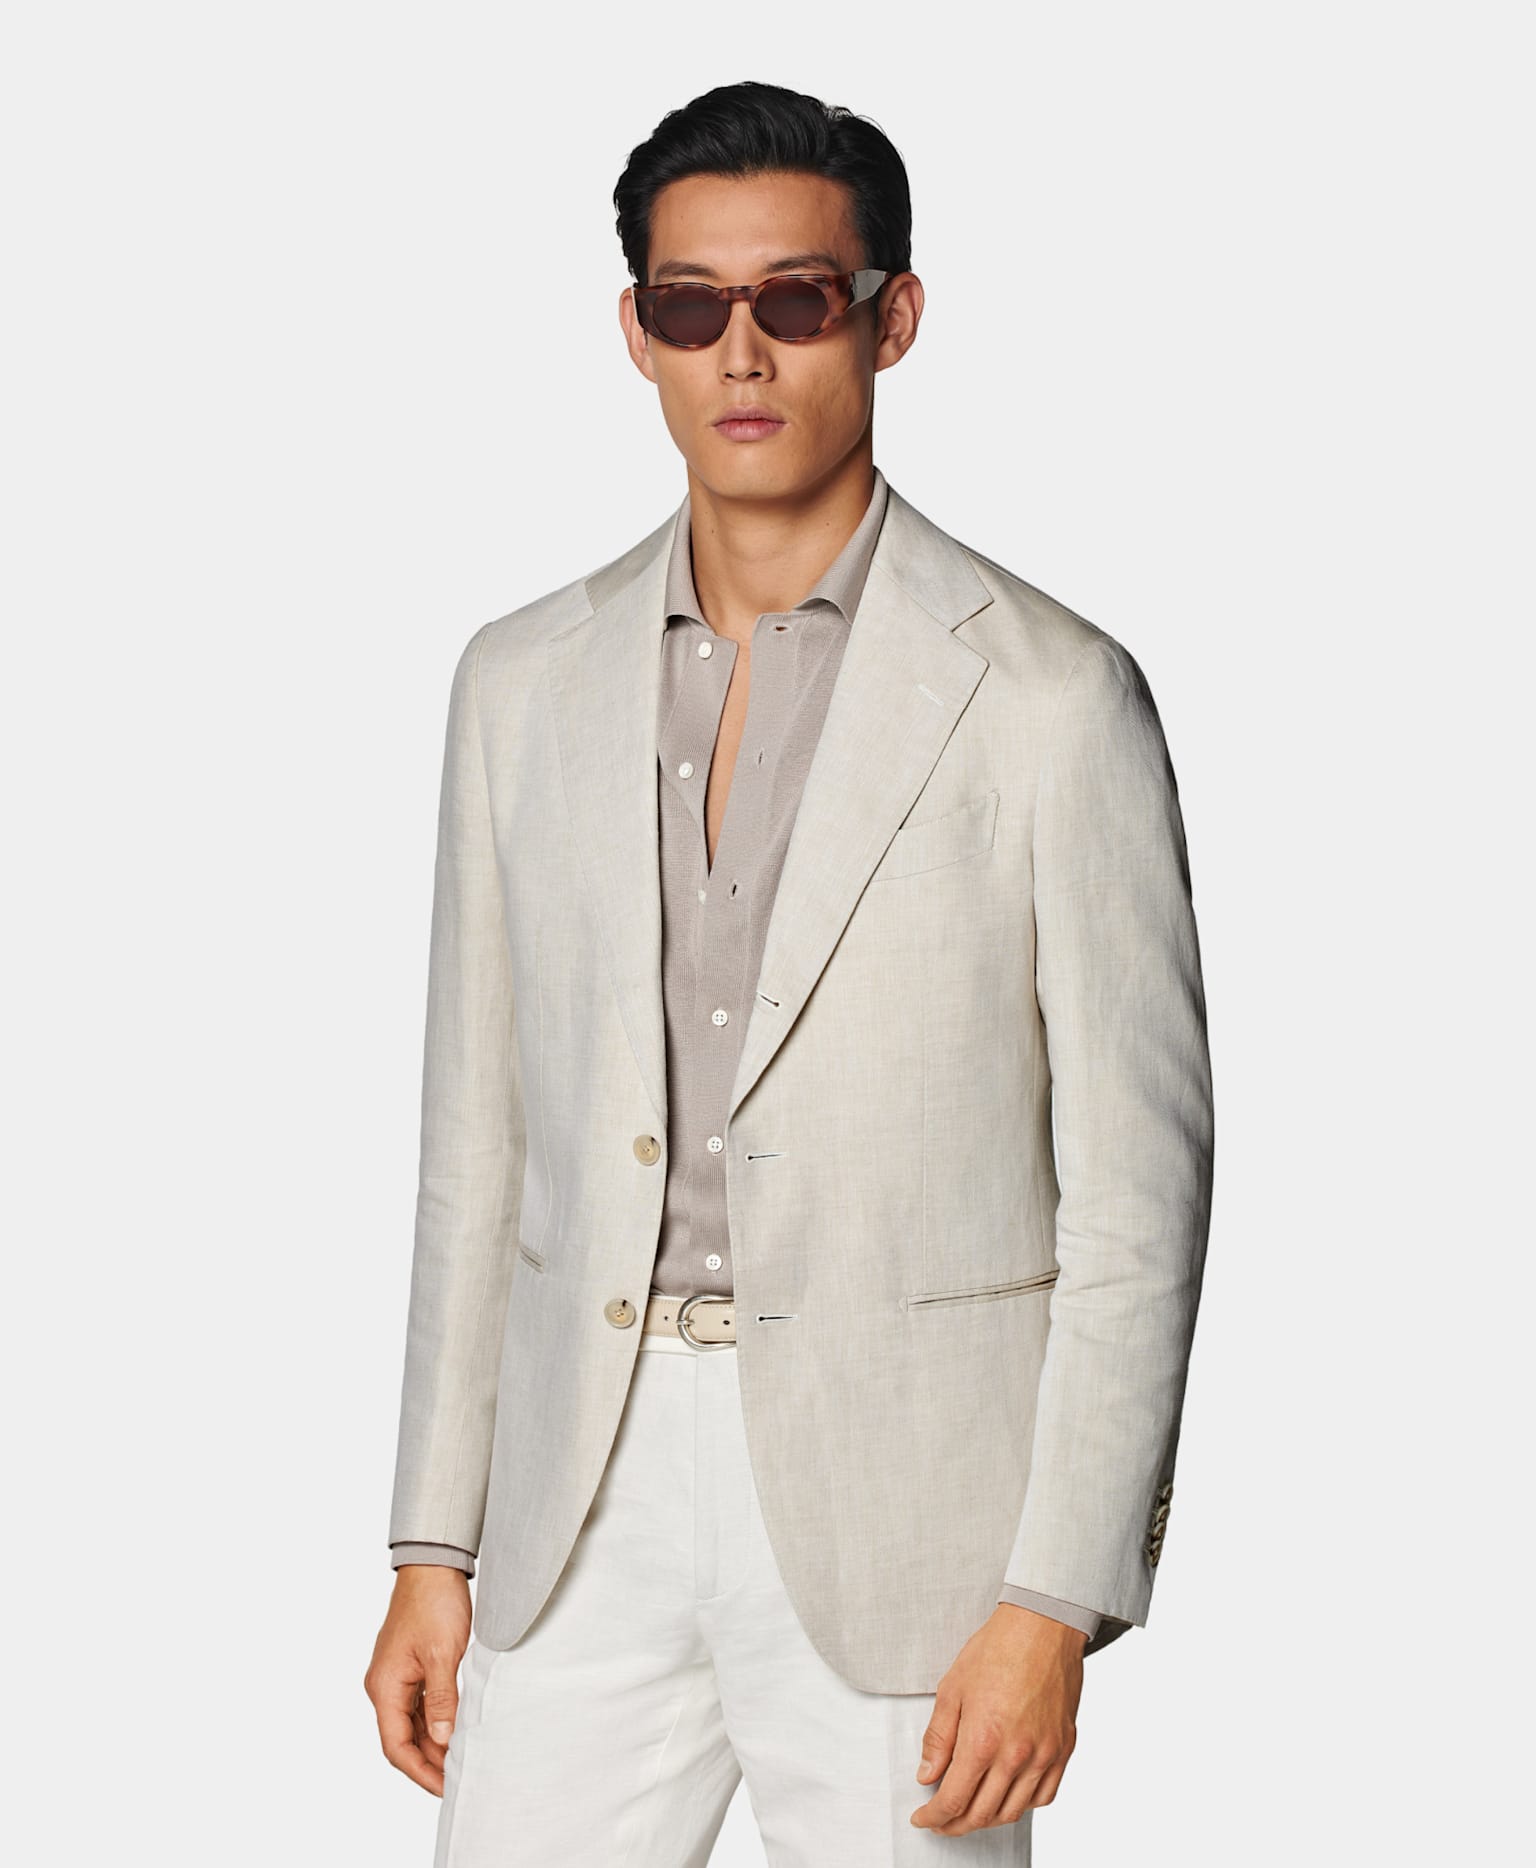 Sand blazer with taupe knitted shirt, off-white leather belt, and white trousers.